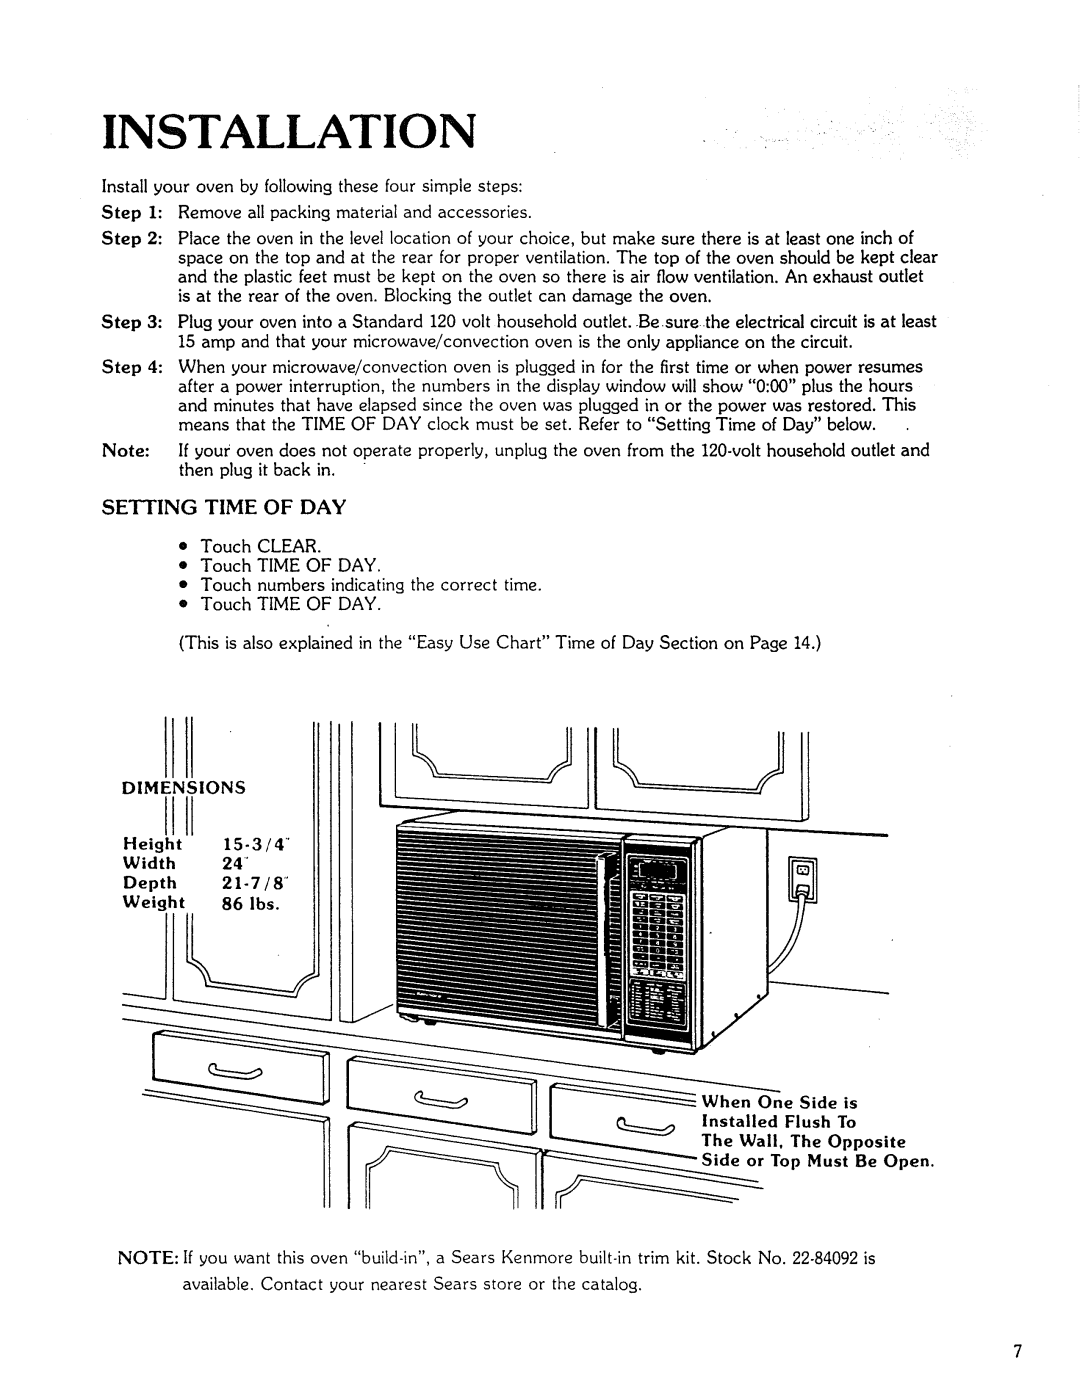 Kenmore Microwave Oven manual Installation, Setting Time Of Day 